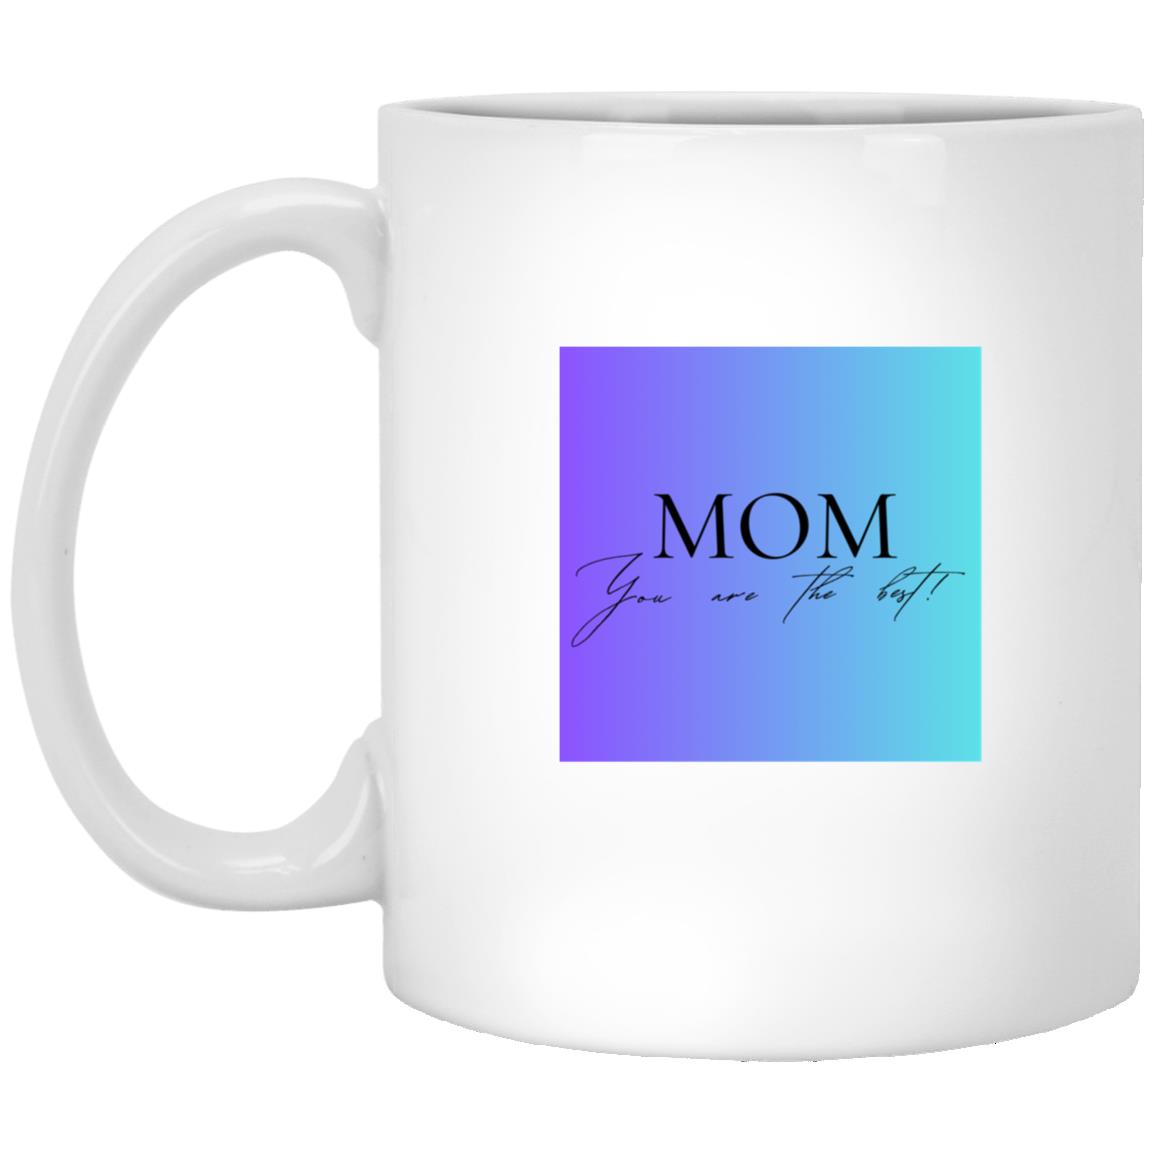 MOM You are the Best - White Ceramic Mugs  Style 18